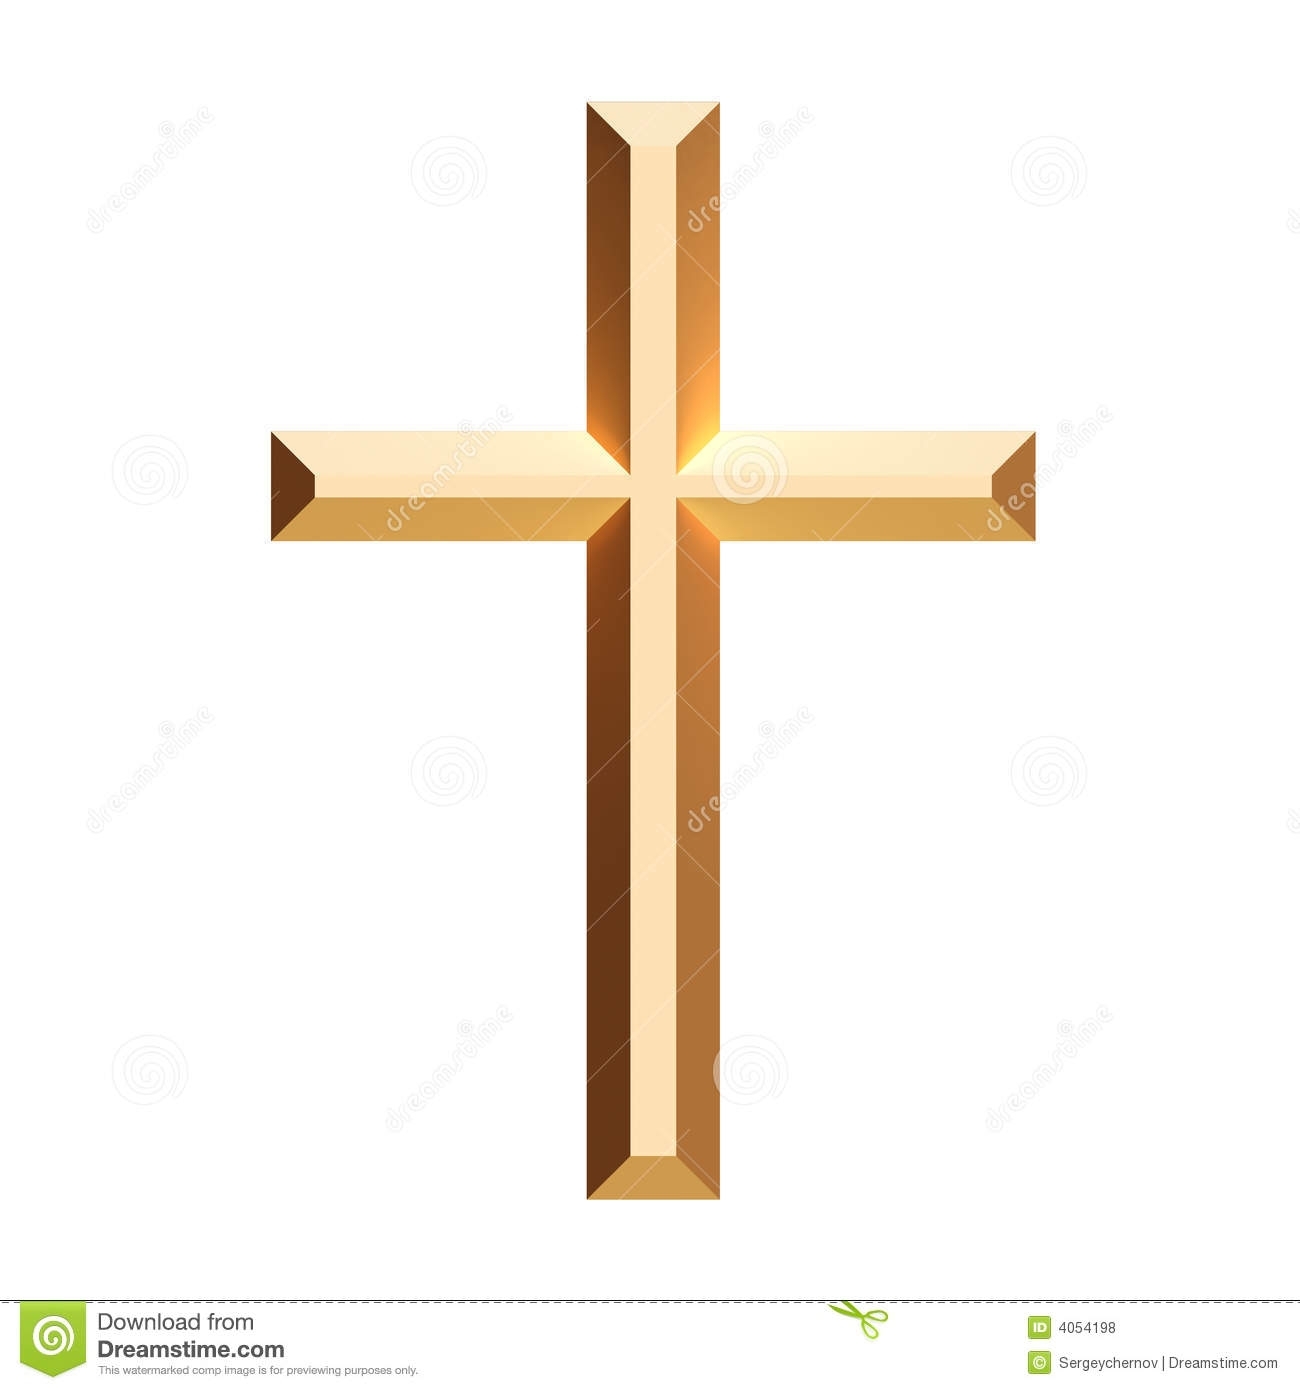 10 Most Popular Pictures Of Crosses To Download FULL HD 1080p For PC Desktop